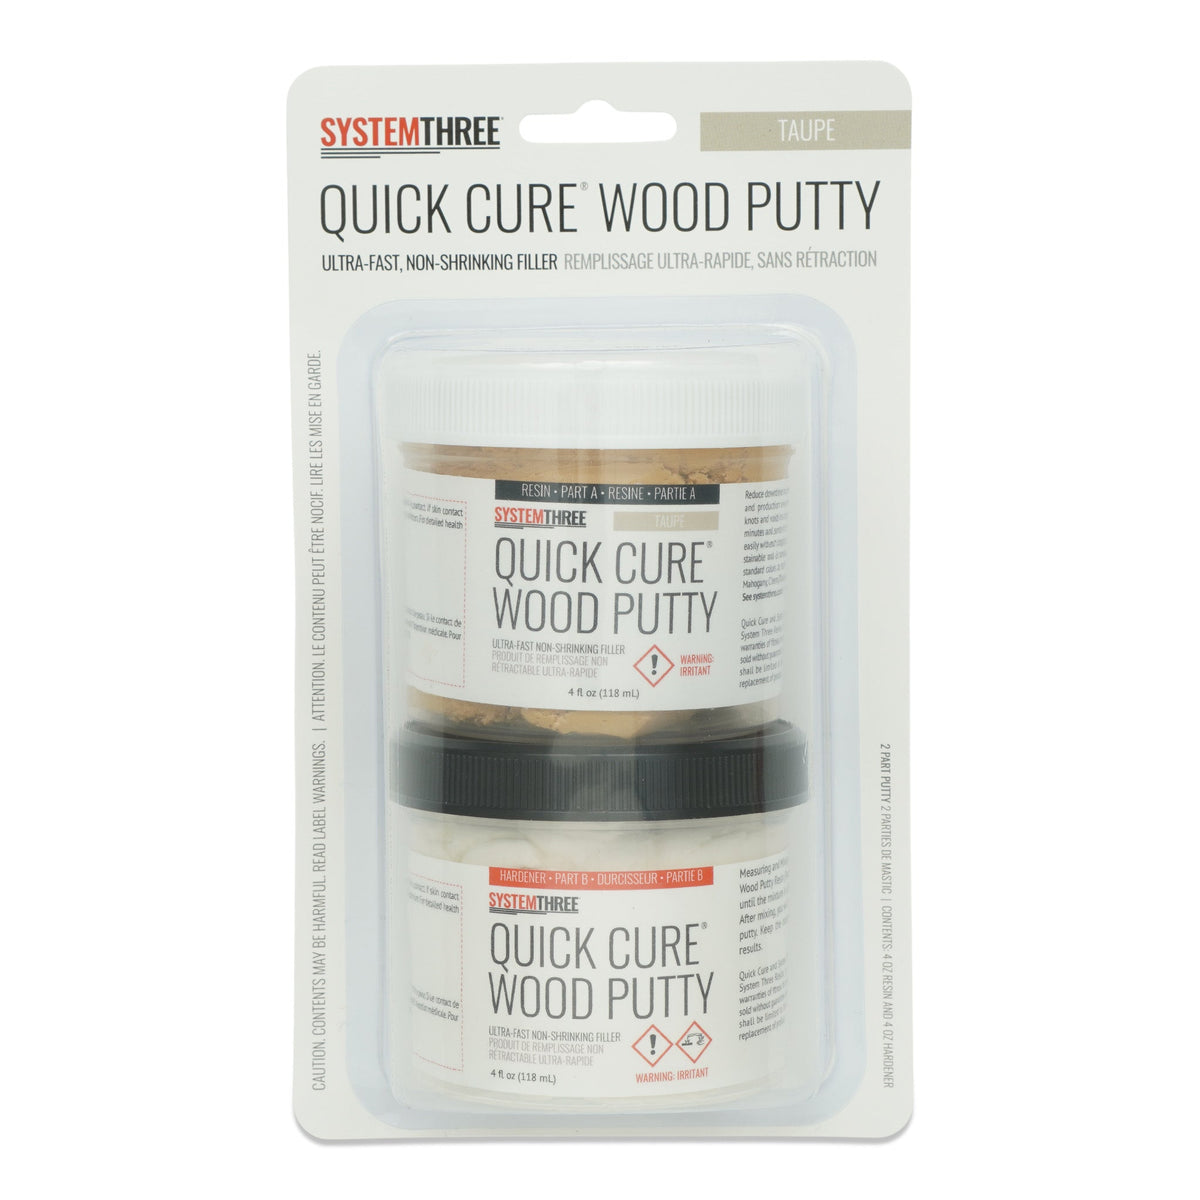 What's The Difference Between Wood Putty and Wood Filler?